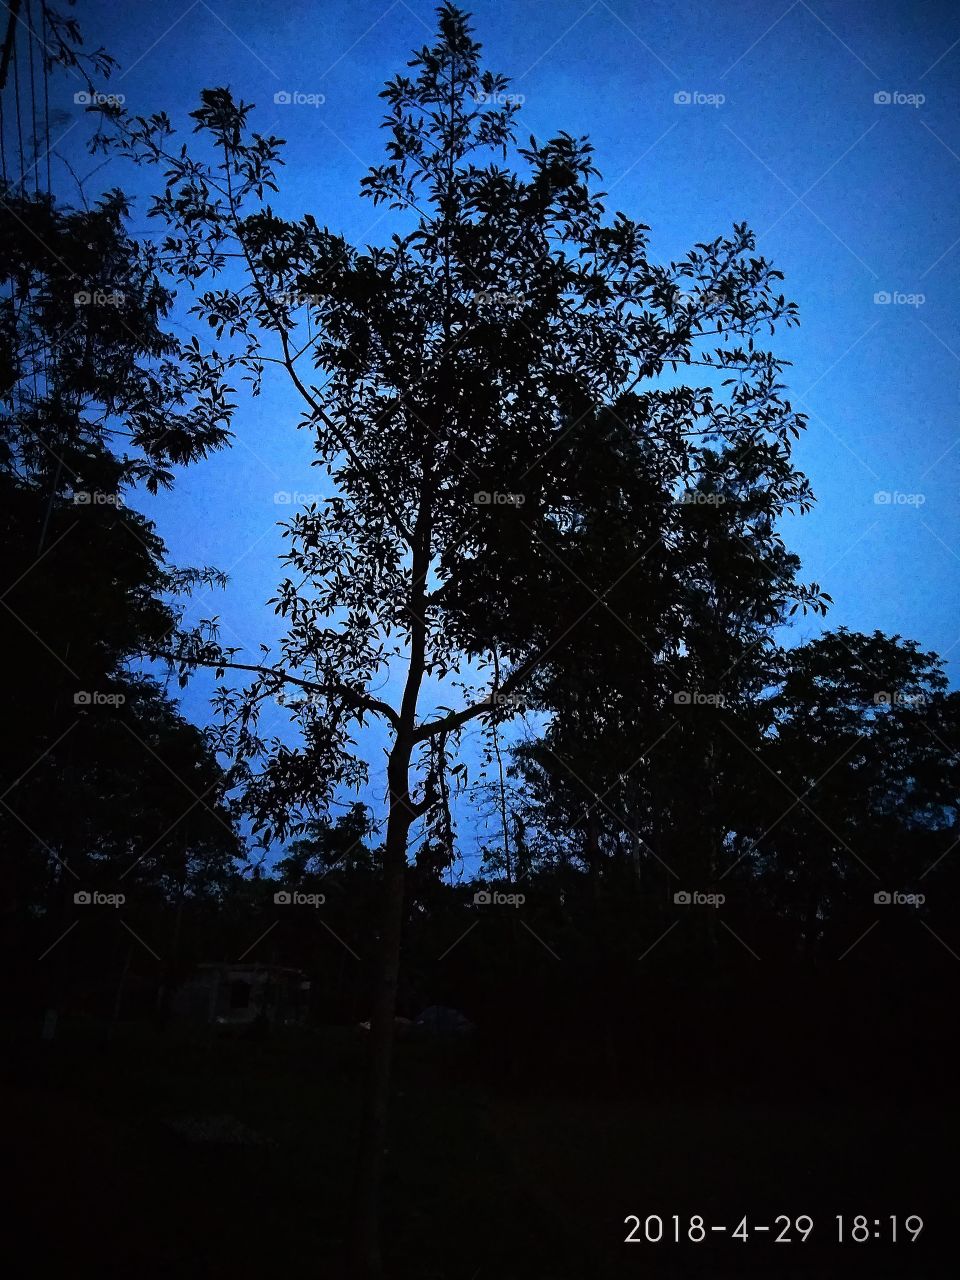 Story of a tree in evening